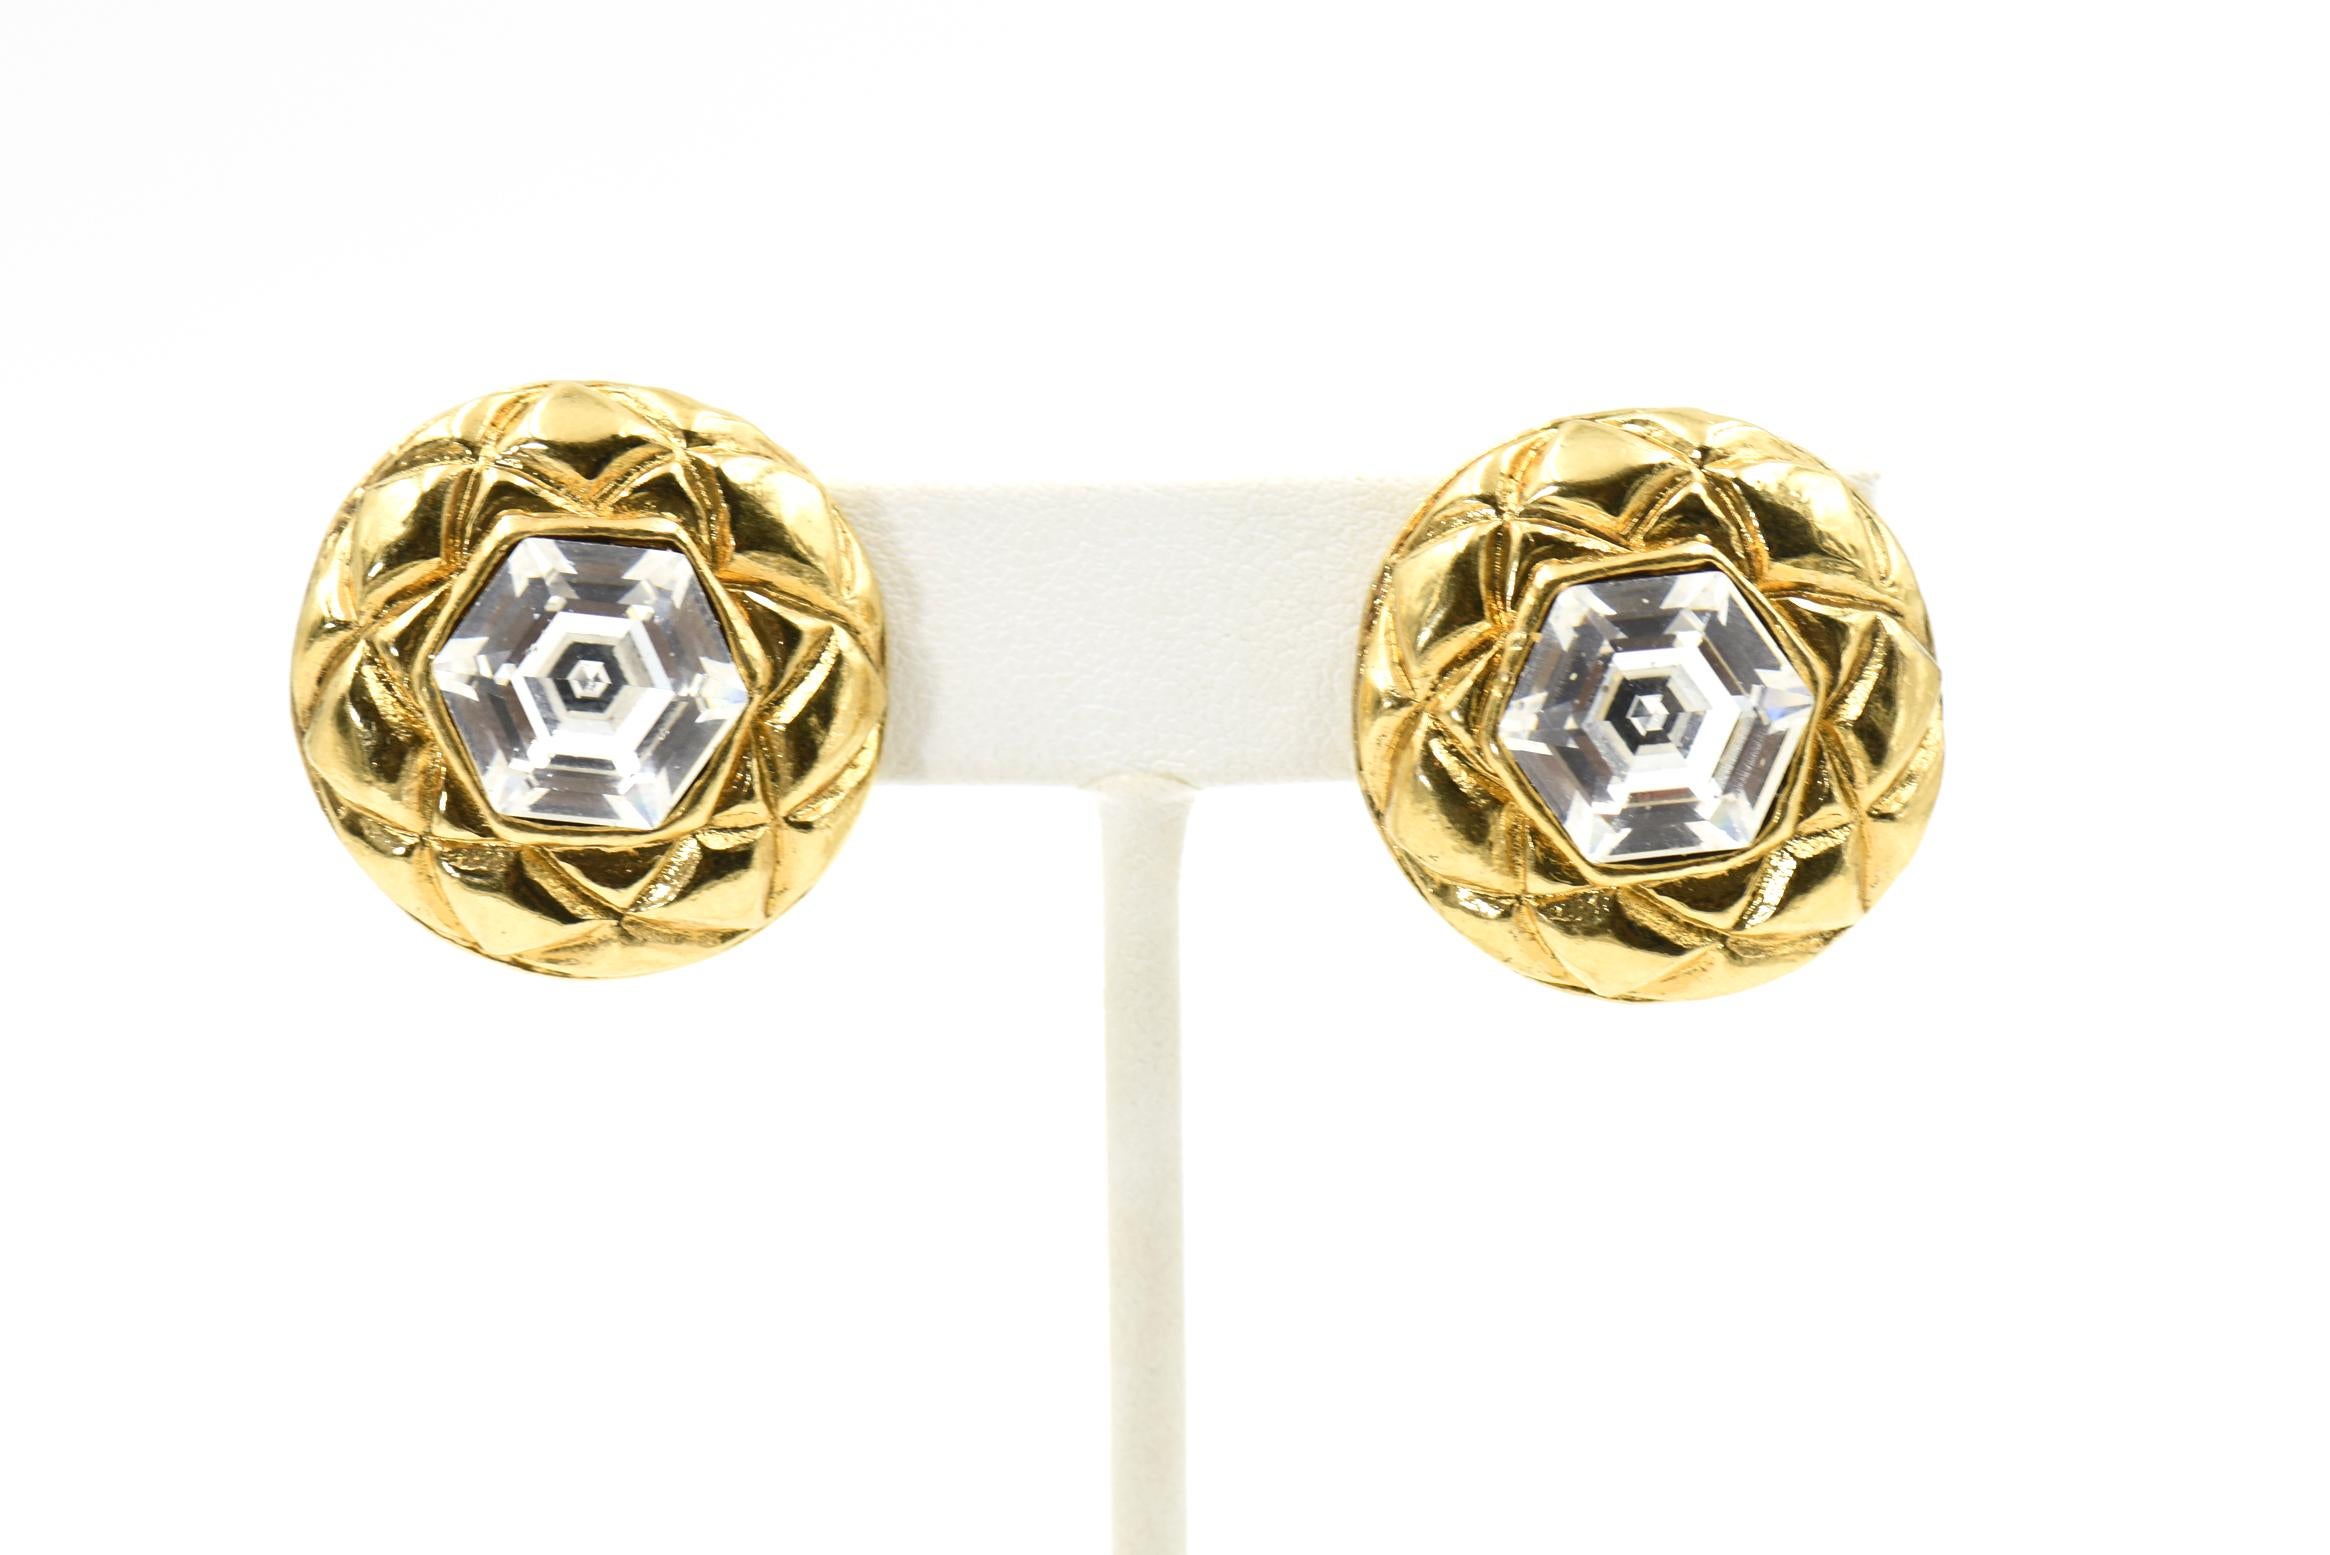 Vintage 1970s Chanel headlight crystal gold-toned quilted earrings with clip back.

Marked Chanel made in Paris on back.